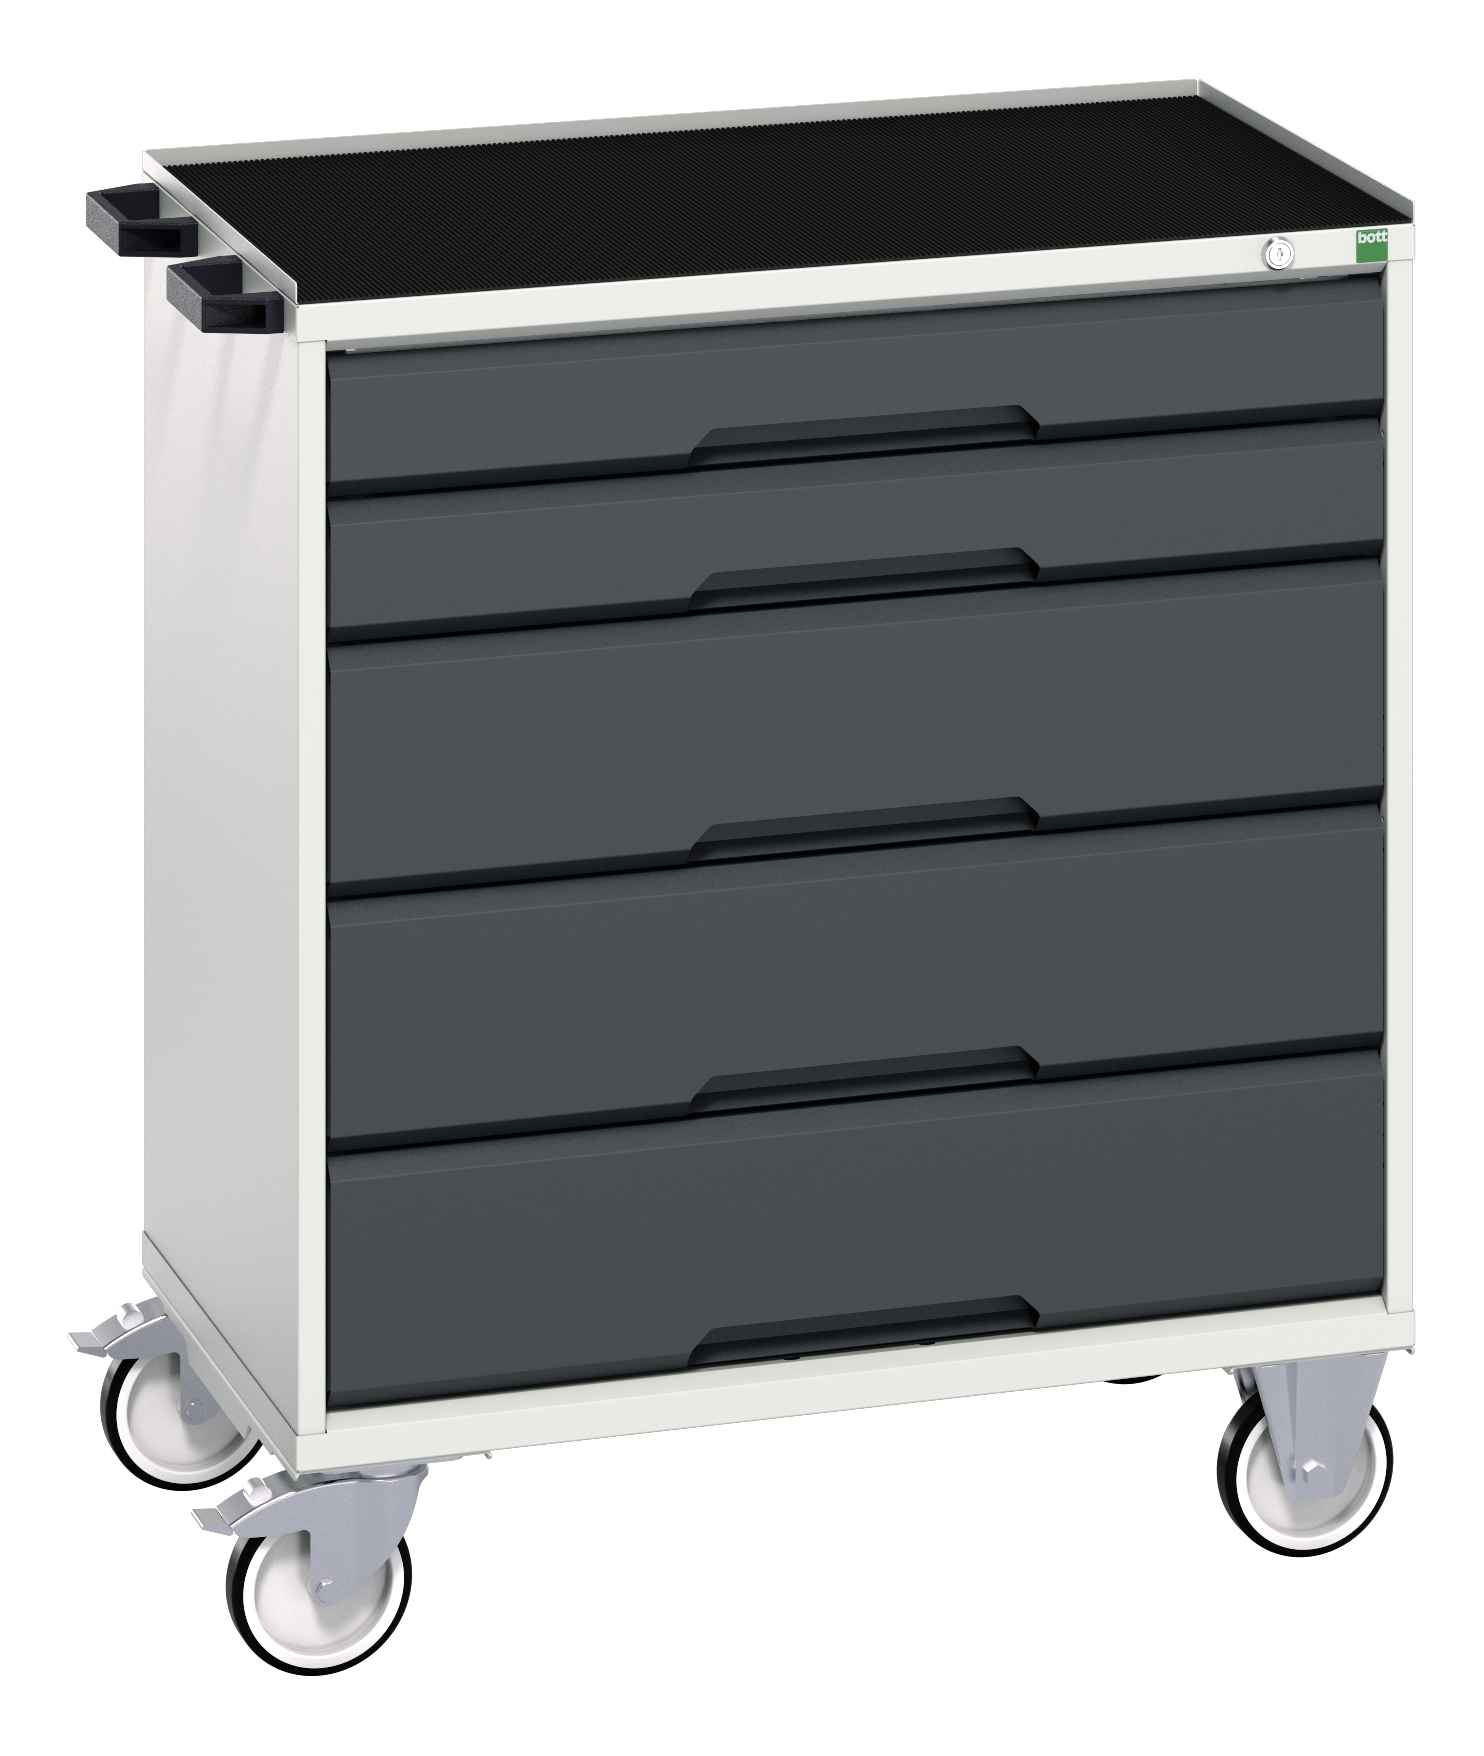 Bott Verso Mobile Drawer Cabinet With 5 Drawers & Top Tray With Mat - 16927002.19